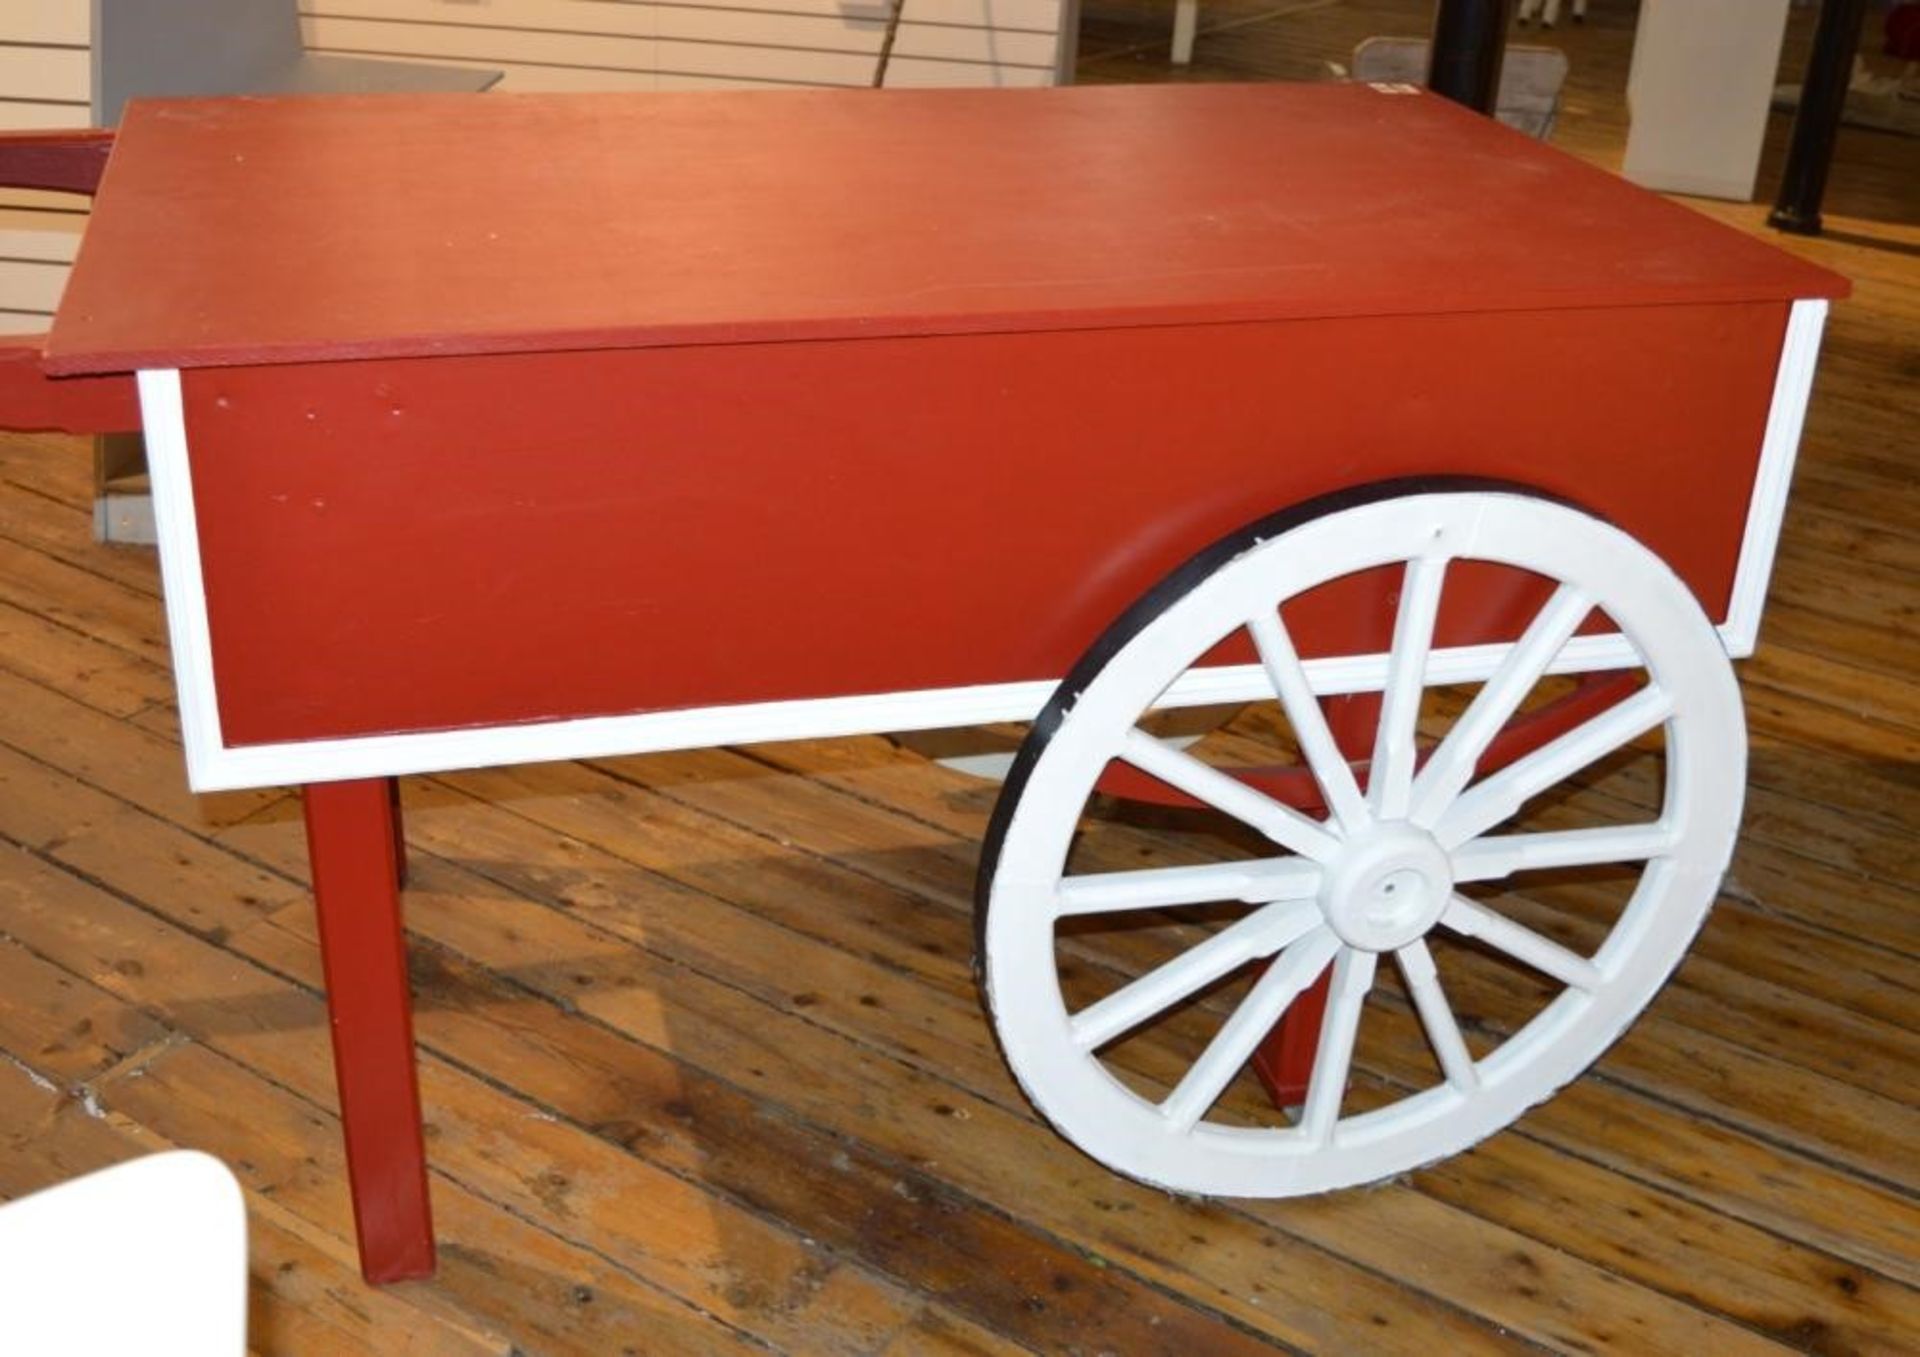 1 x Retail Display Cart in Red - H94 x W95 x D150 (204 with handles) cms - Ref BB376 TF - CL351 - Lo - Image 4 of 5